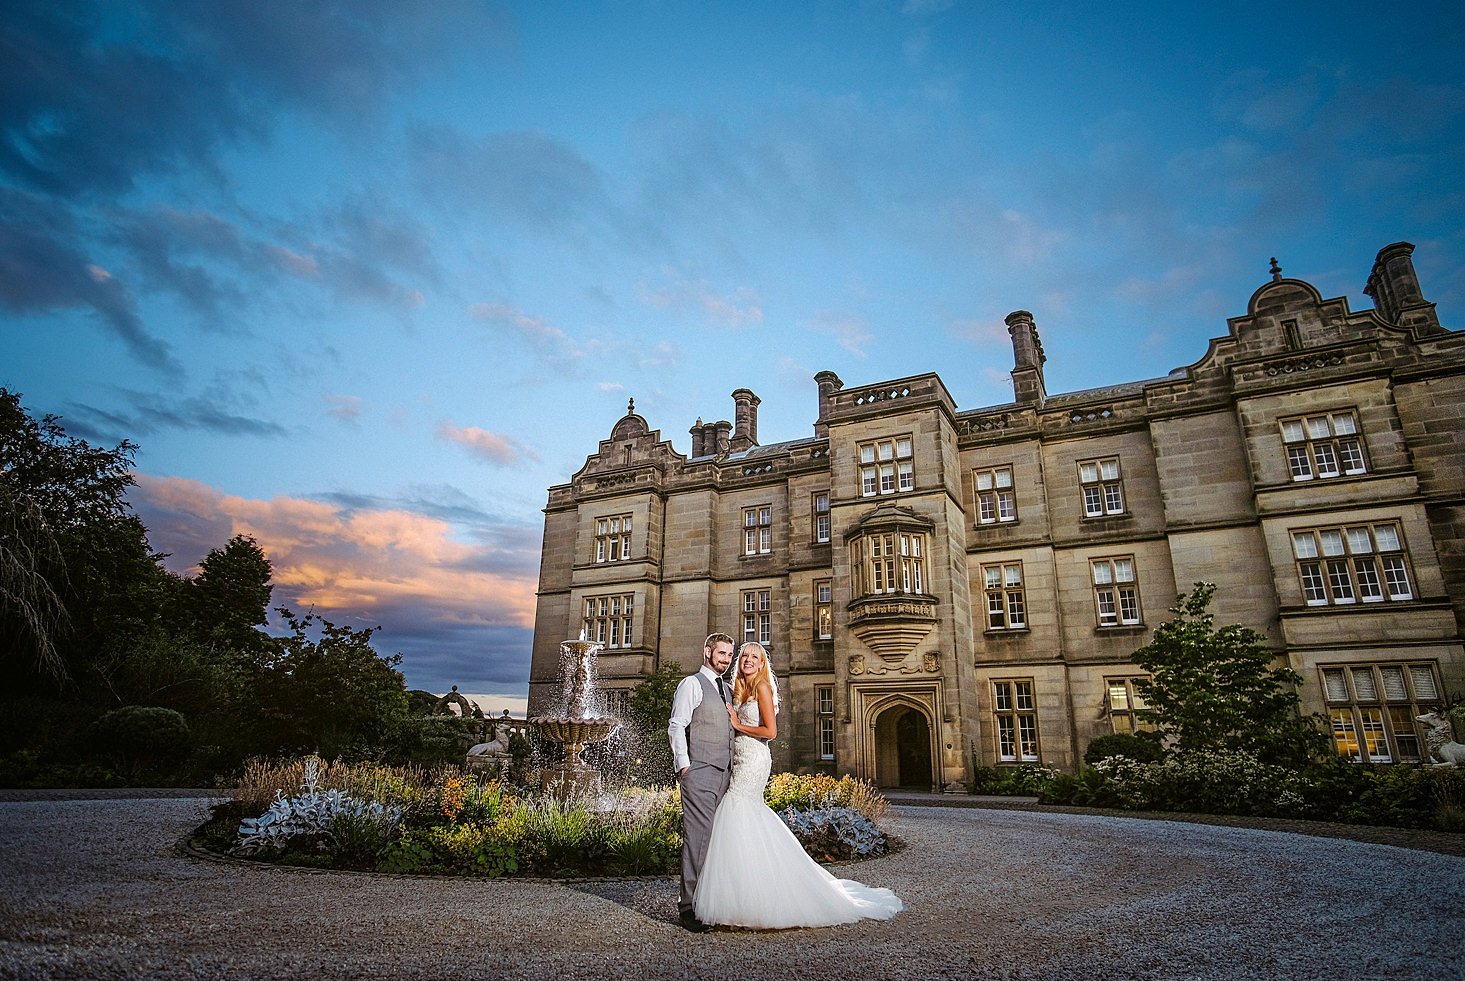 The perfect moment, with the perfect person.
@matfenhall 
#wedding #weddings #weddingday #photo #photography #photographer #weddingphotography #weddingphotographer #northeastphotography #northeastwedding #northeastweddings #northeastweddingphotograph